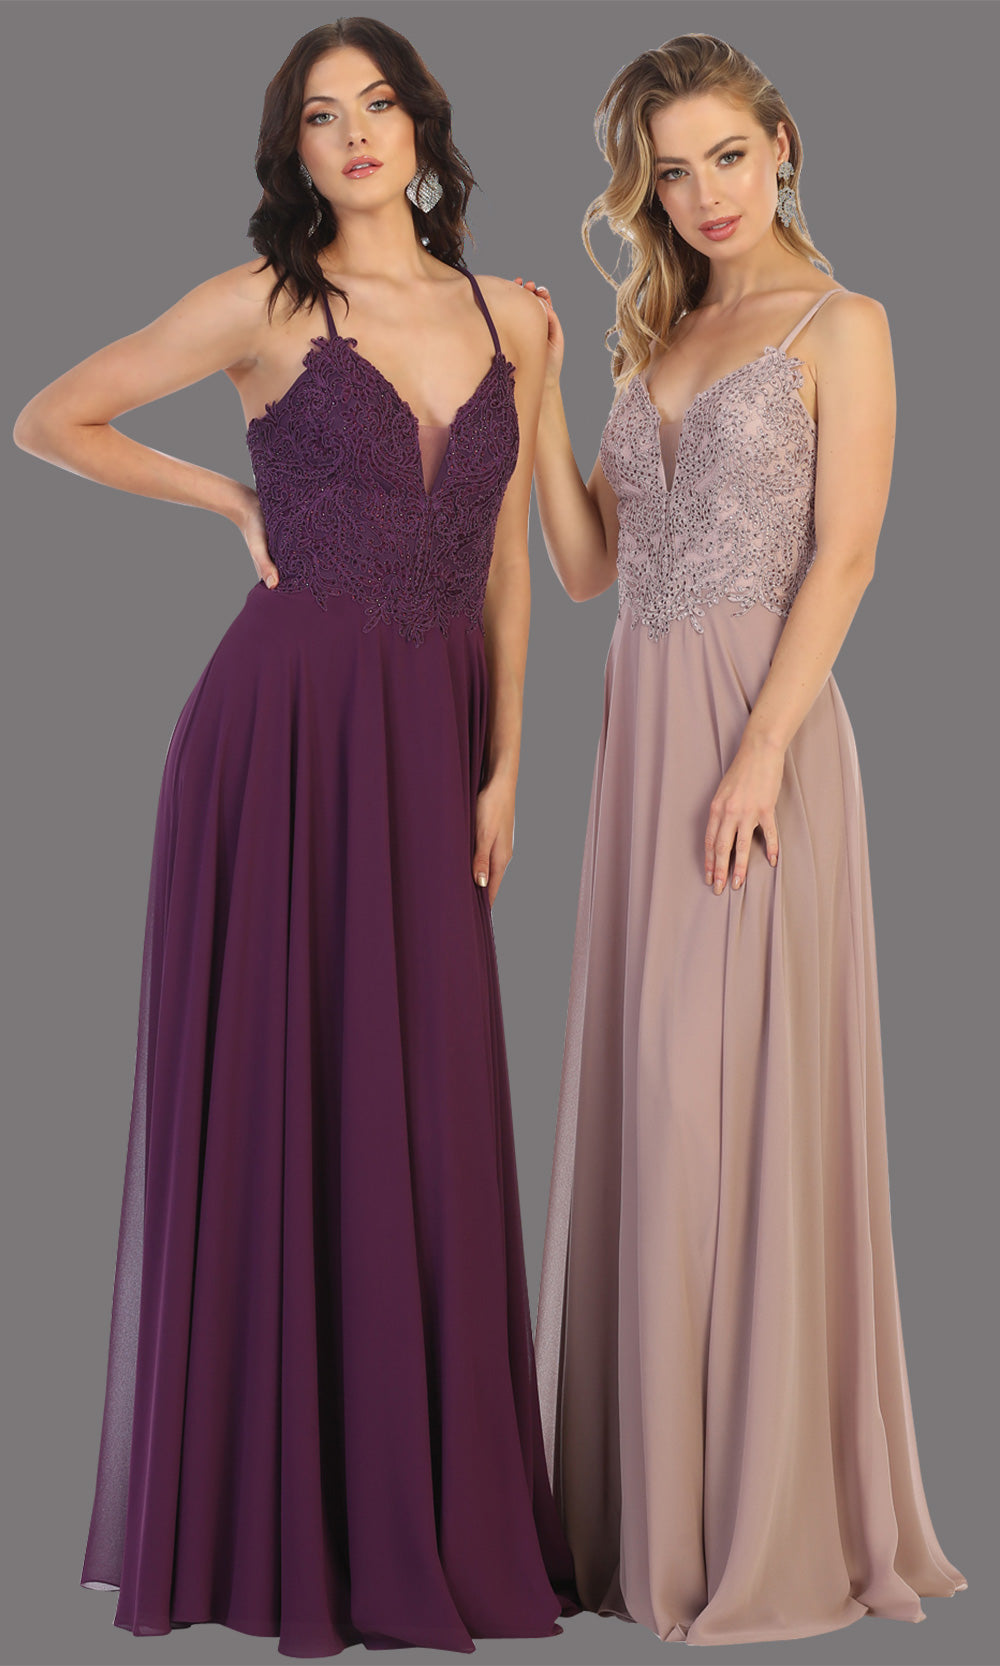 Mayqueen MQ1750 long eggplant flowy sleek & sexy dress w/straps. This dark purple dress is perfect for bridesmaid dresses, simple wedding guest dress, prom dress, gala, black tie wedding. Plus sizes are available, evening party dress.jpg